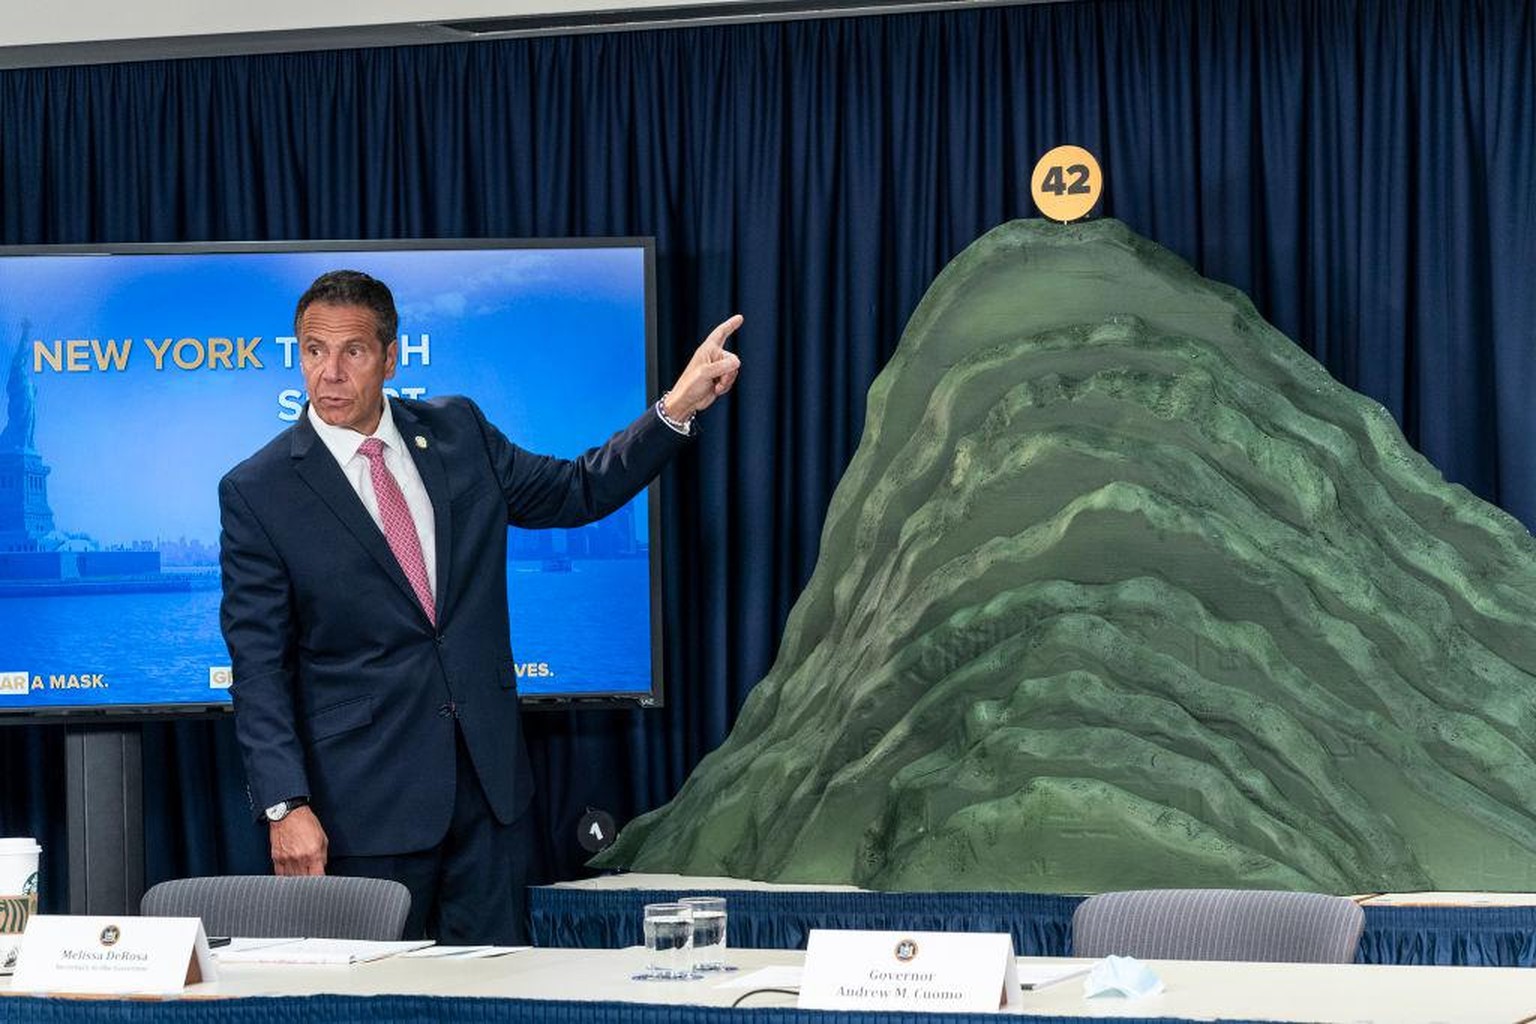 NEW YORK, UNITED STATES - 2020/06/29: NYS Governor Andrew Cuomo makes an announcement and holds media briefing at 3rd Avenue office. Cuomo unveiled green topographic sculpture model of COVID-19 hospit ...